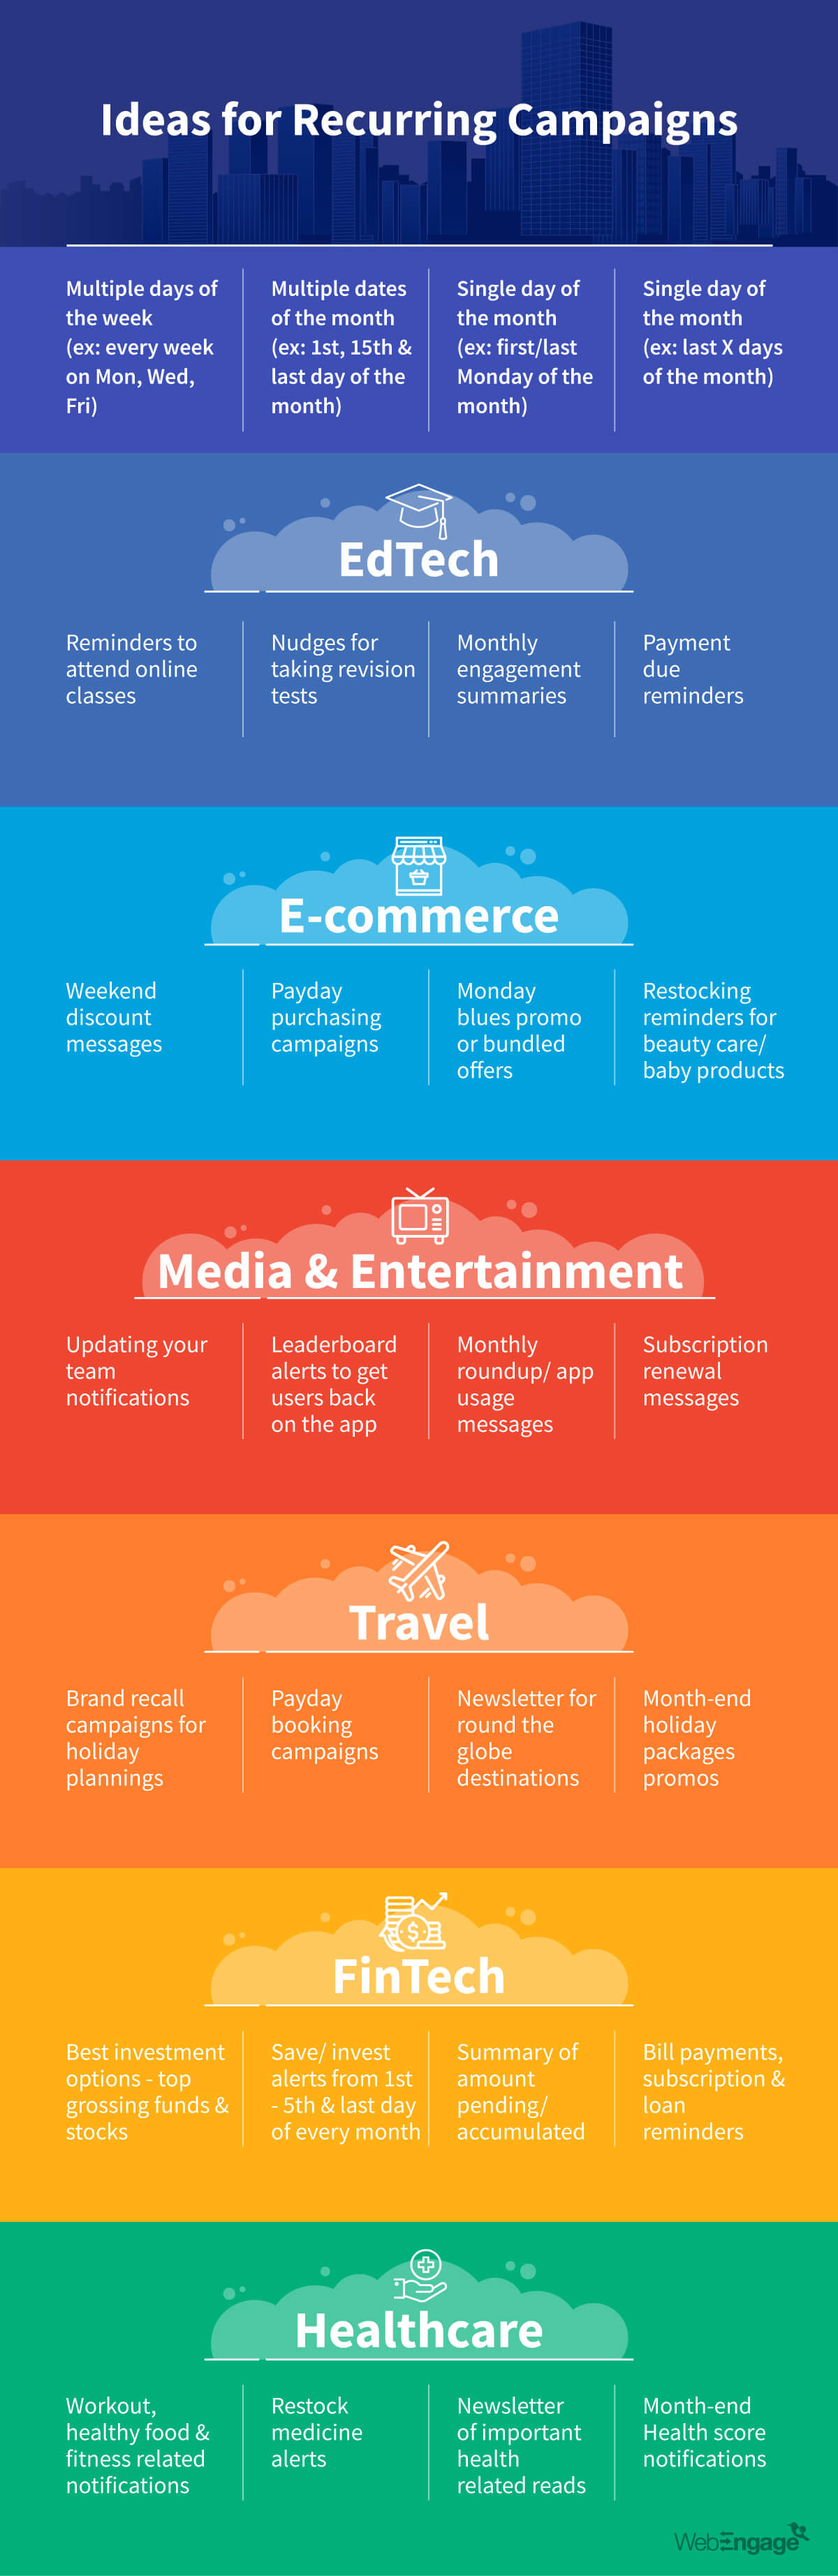 Infographic recurring campaign ideas